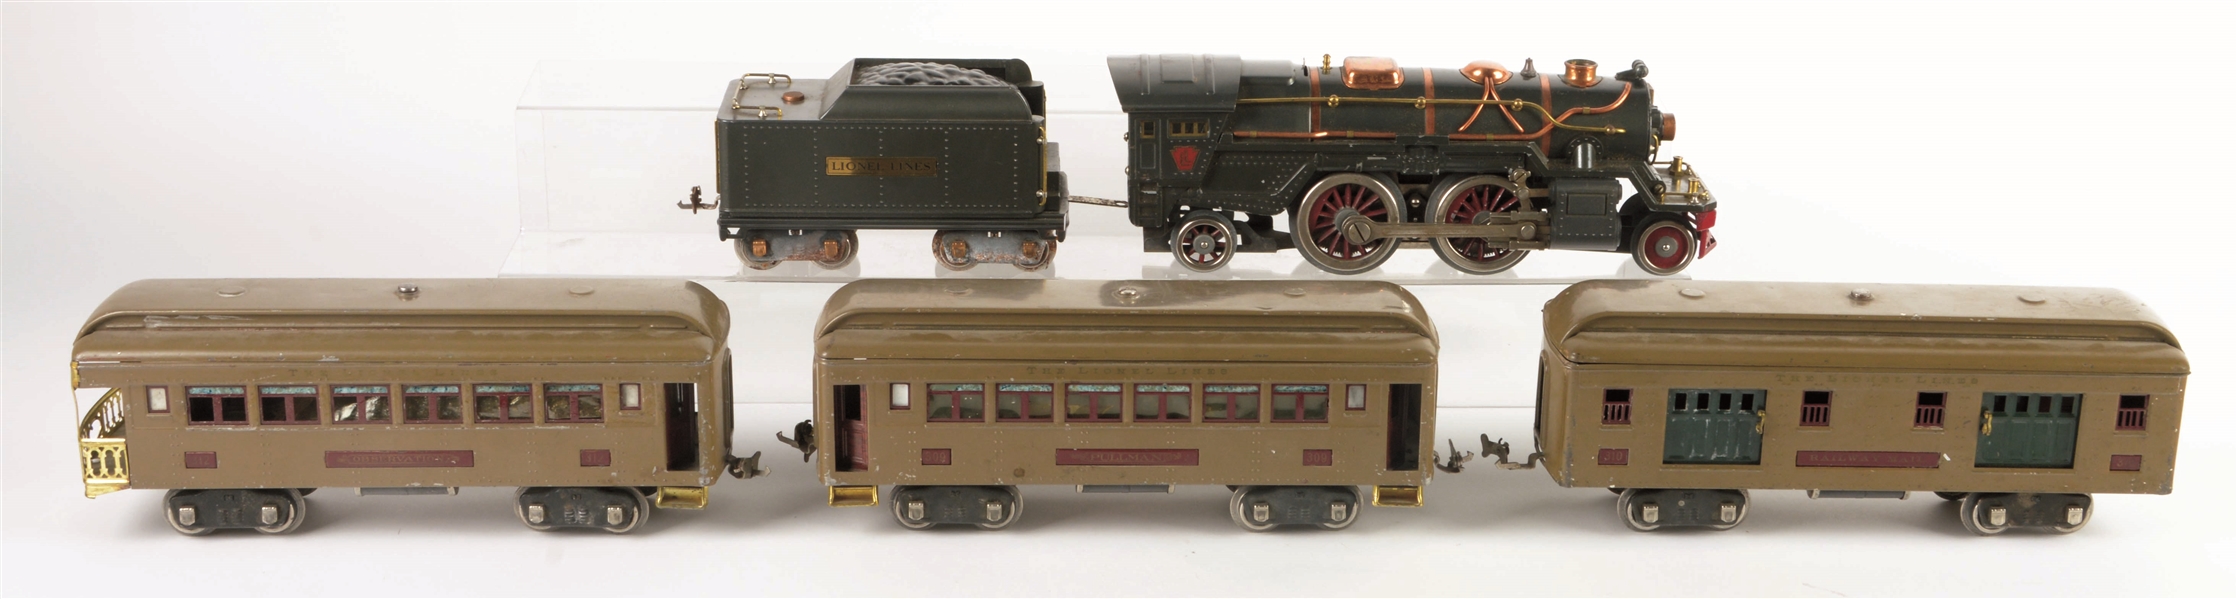 LIONEL 385 WITH THREE PASSENGER CARS.